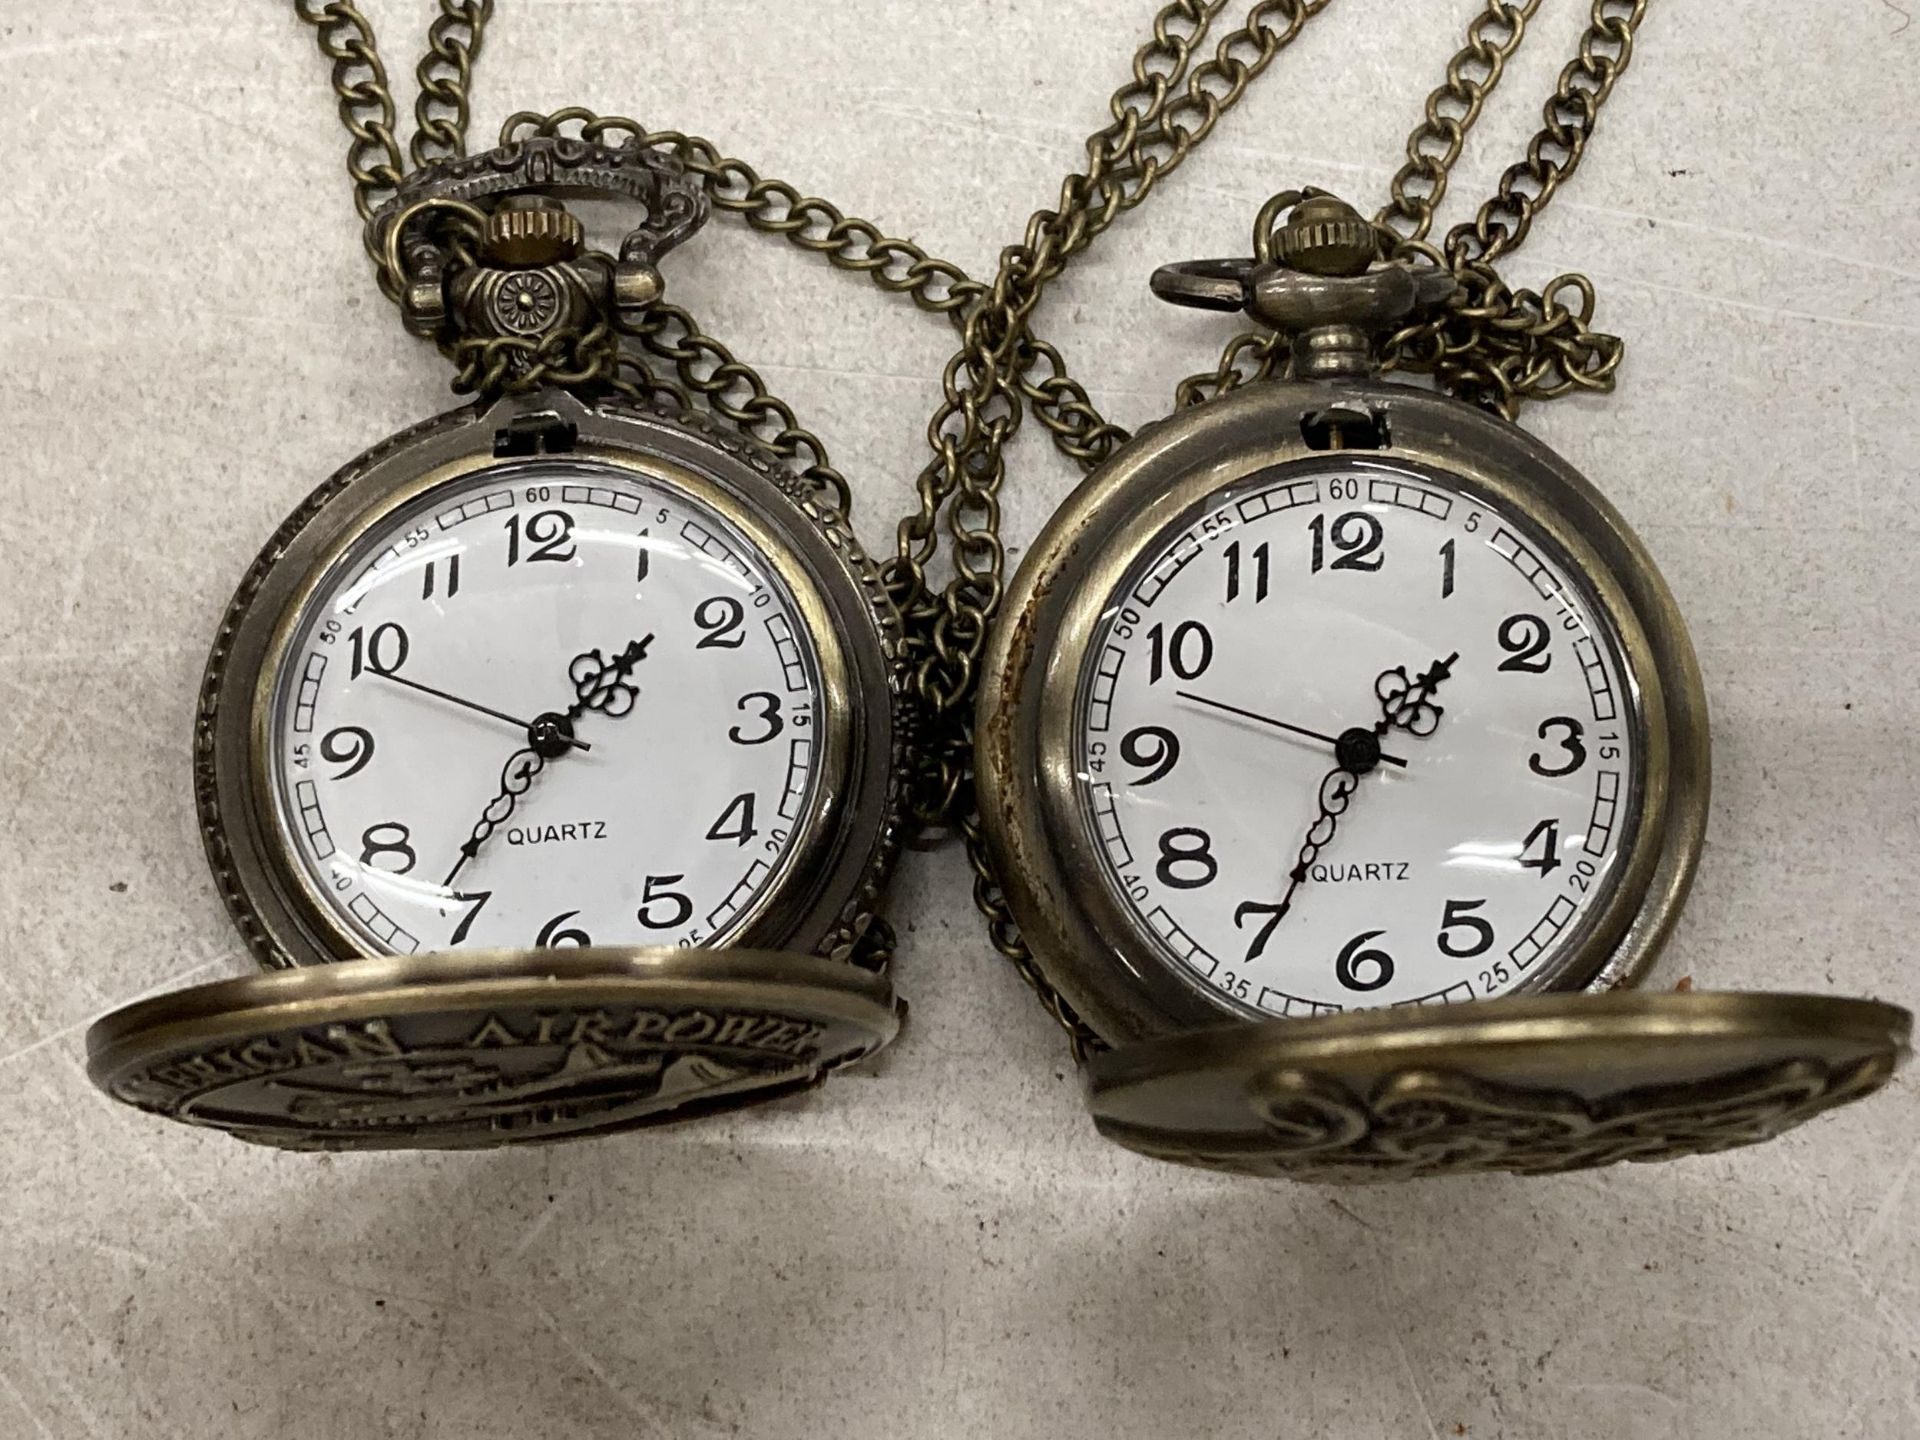 TWO POCKET WATCHES WITH IMAGES OF A USA BOMBER AND A COAT OF ARMS - Image 3 of 3